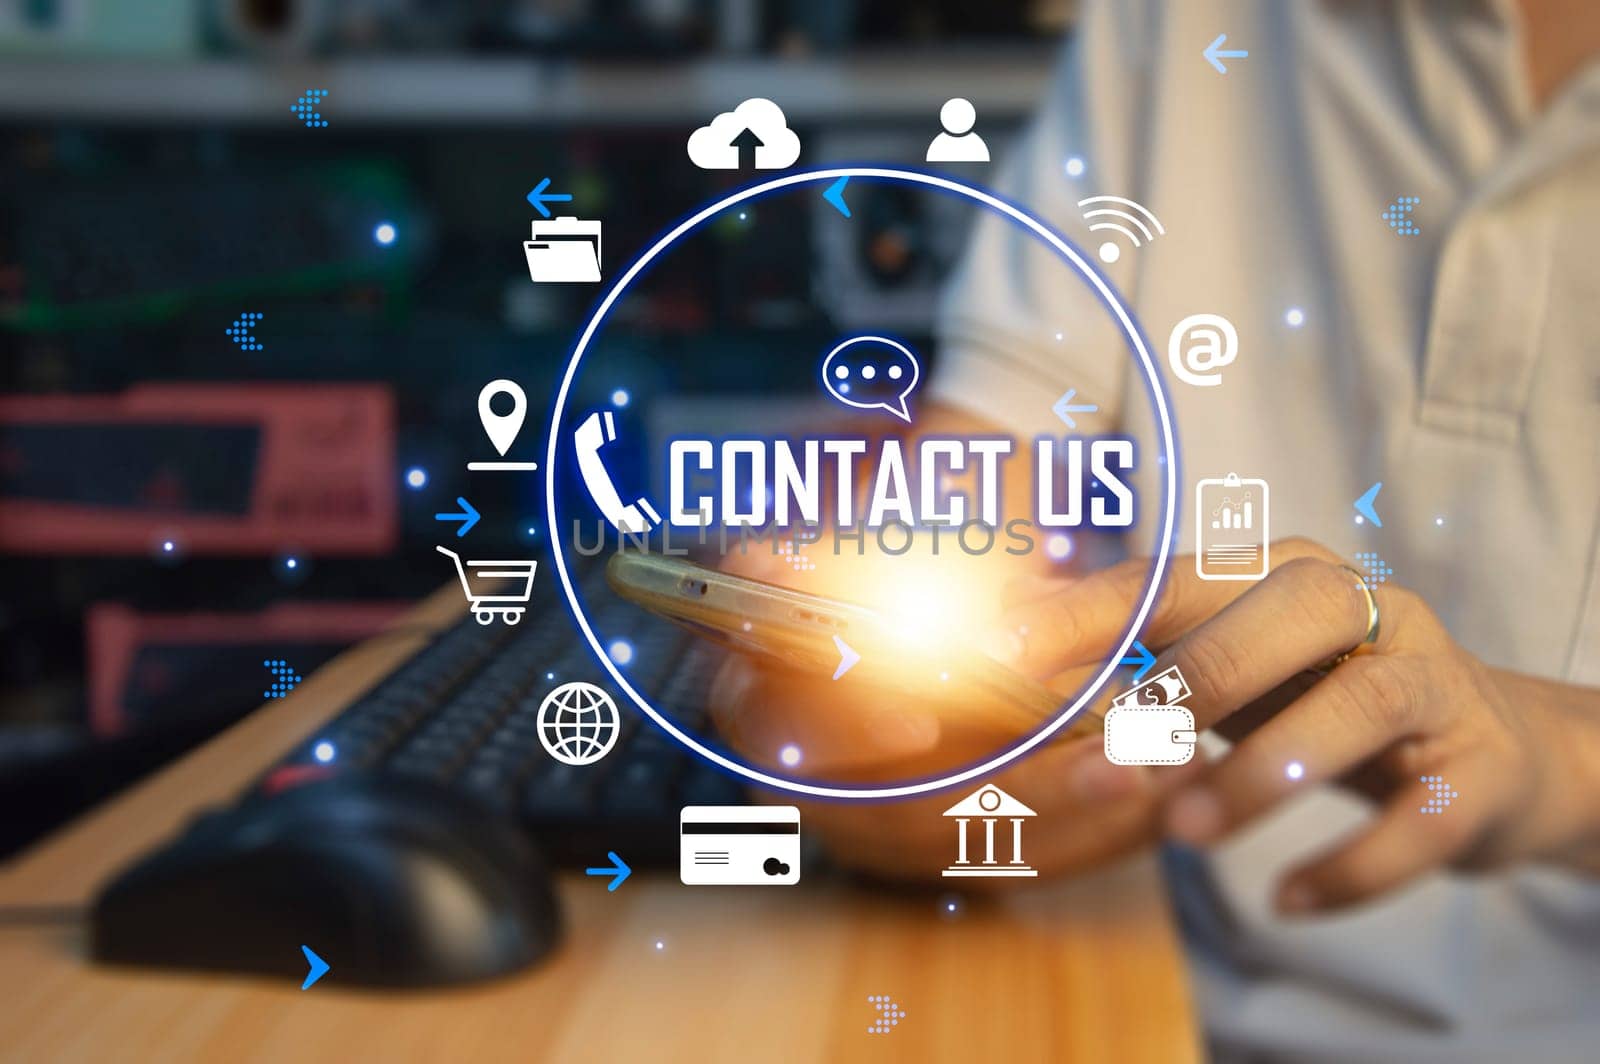 Contact us or our customer support hotline where people connect. and touch the contact icon on the virtual screen